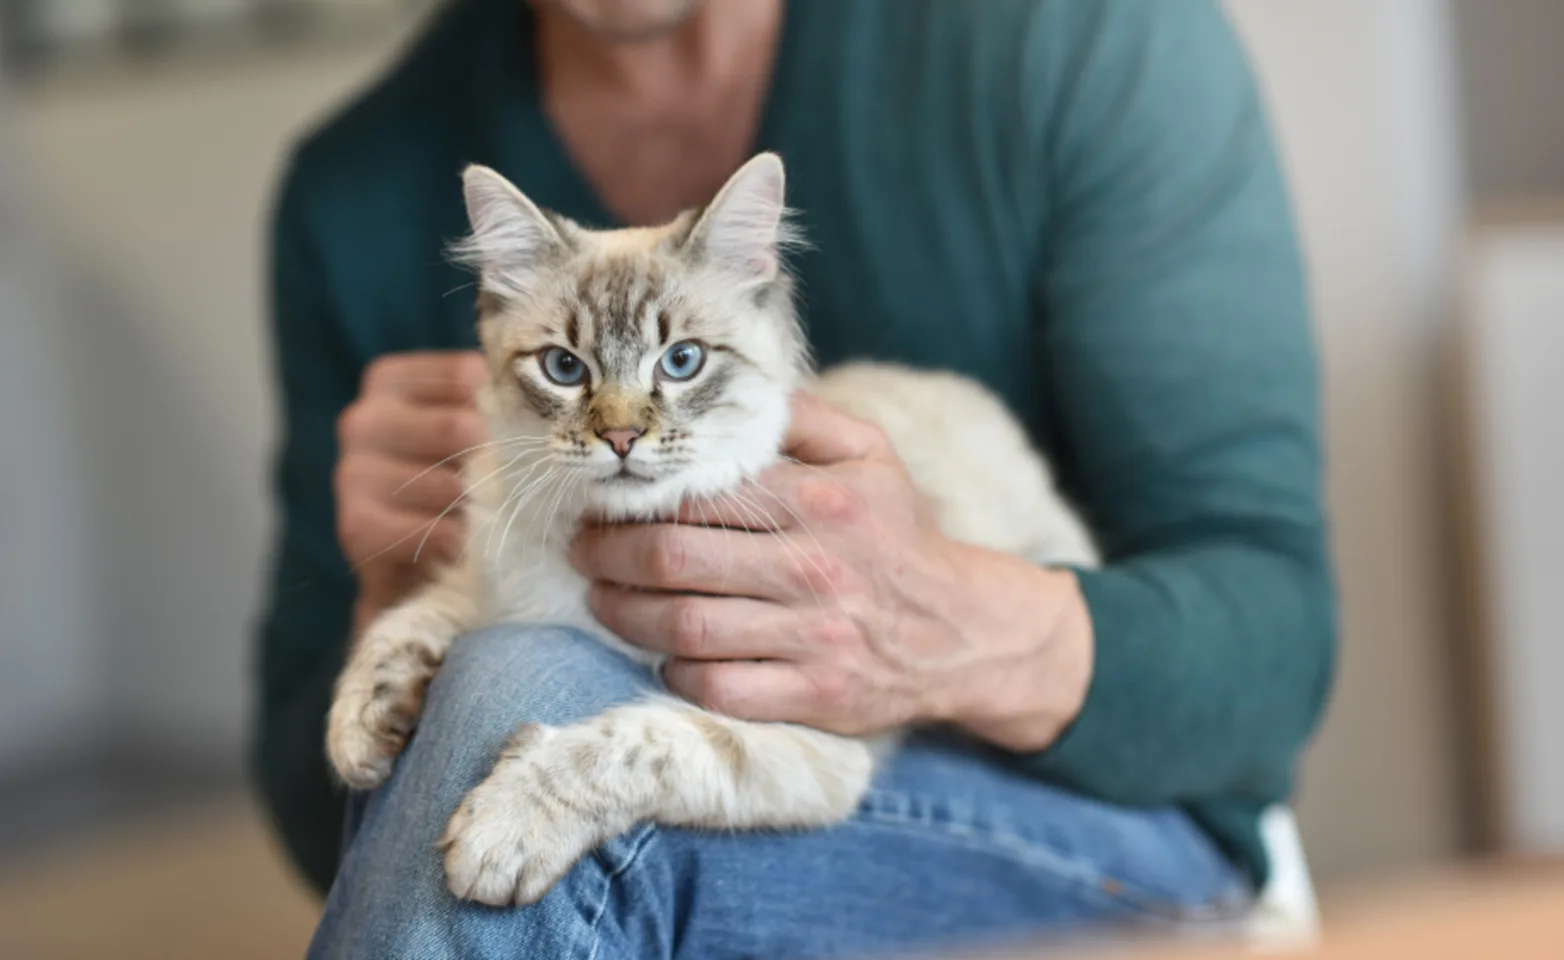 Owner Holding a Gray Cat at Home